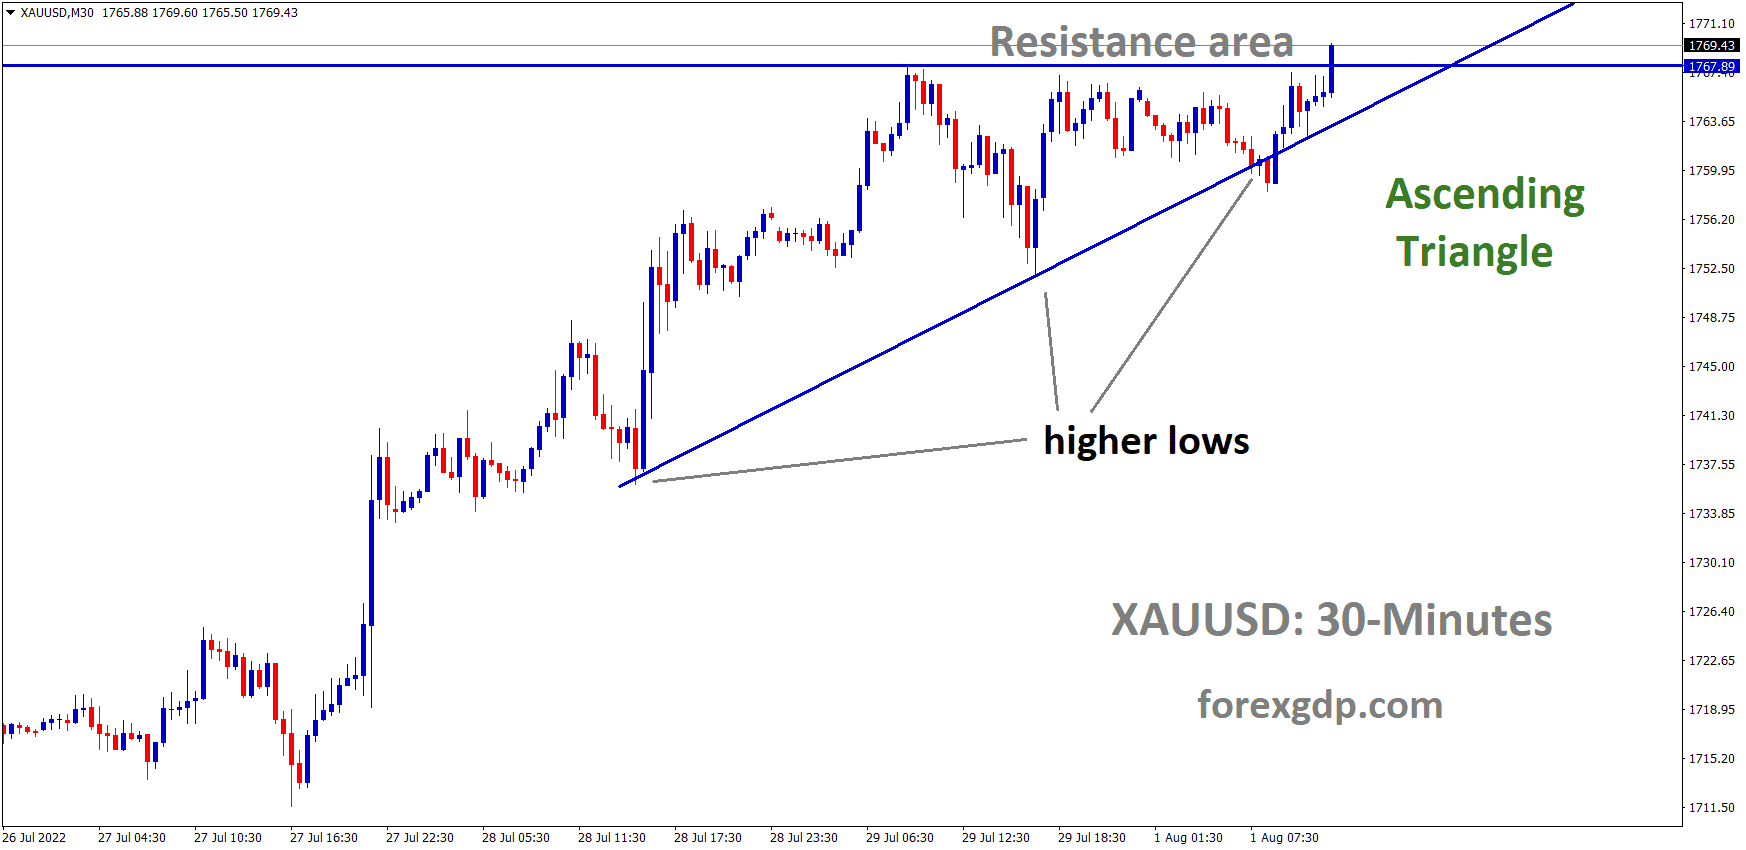 XAUUSD Gold price is moving in an Ascending triangle pattern and the market has reached the Horizontal resistance area of the Pattern.